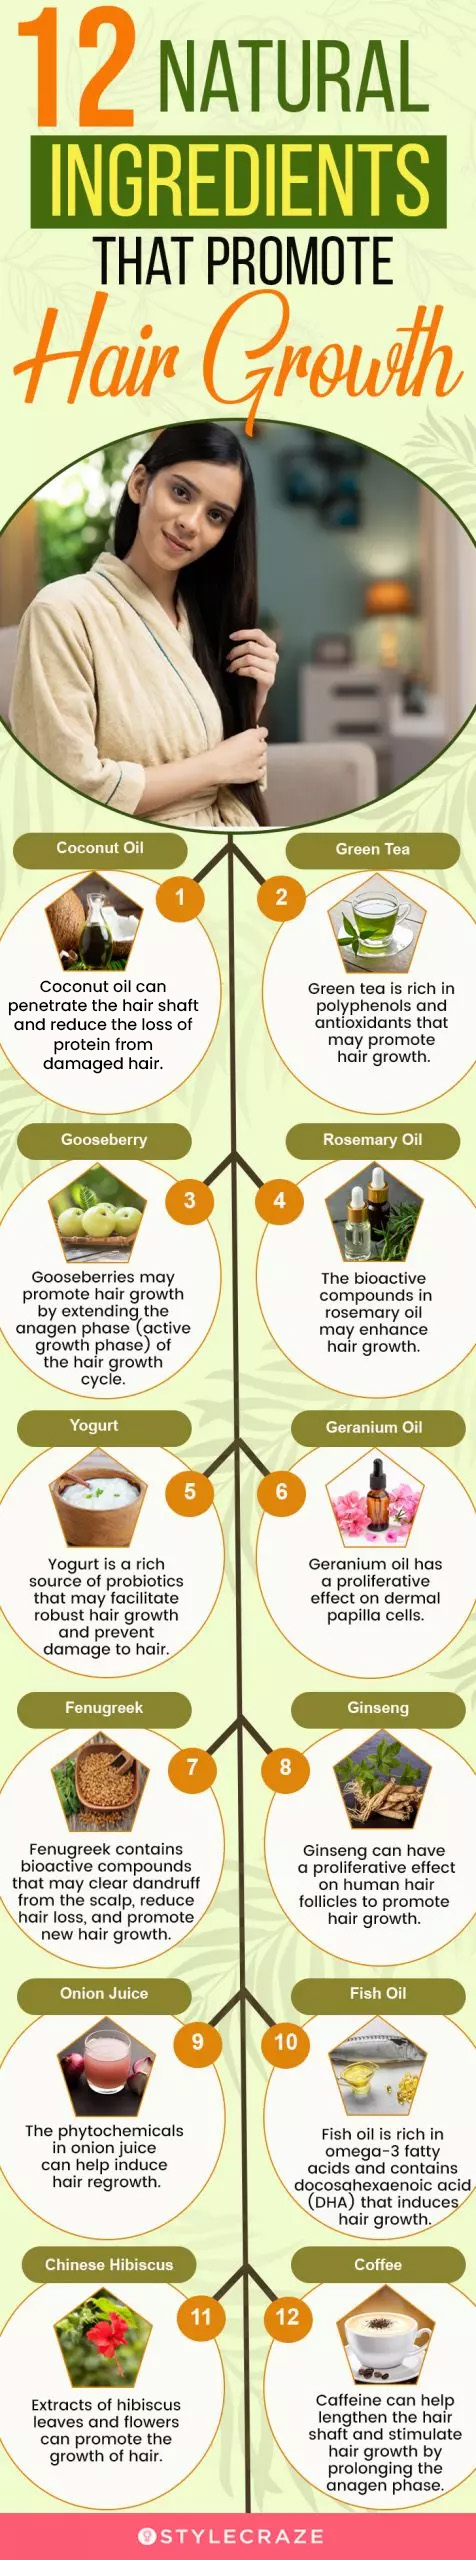 6 Home Remedies for Hair Growth & How to Use Them